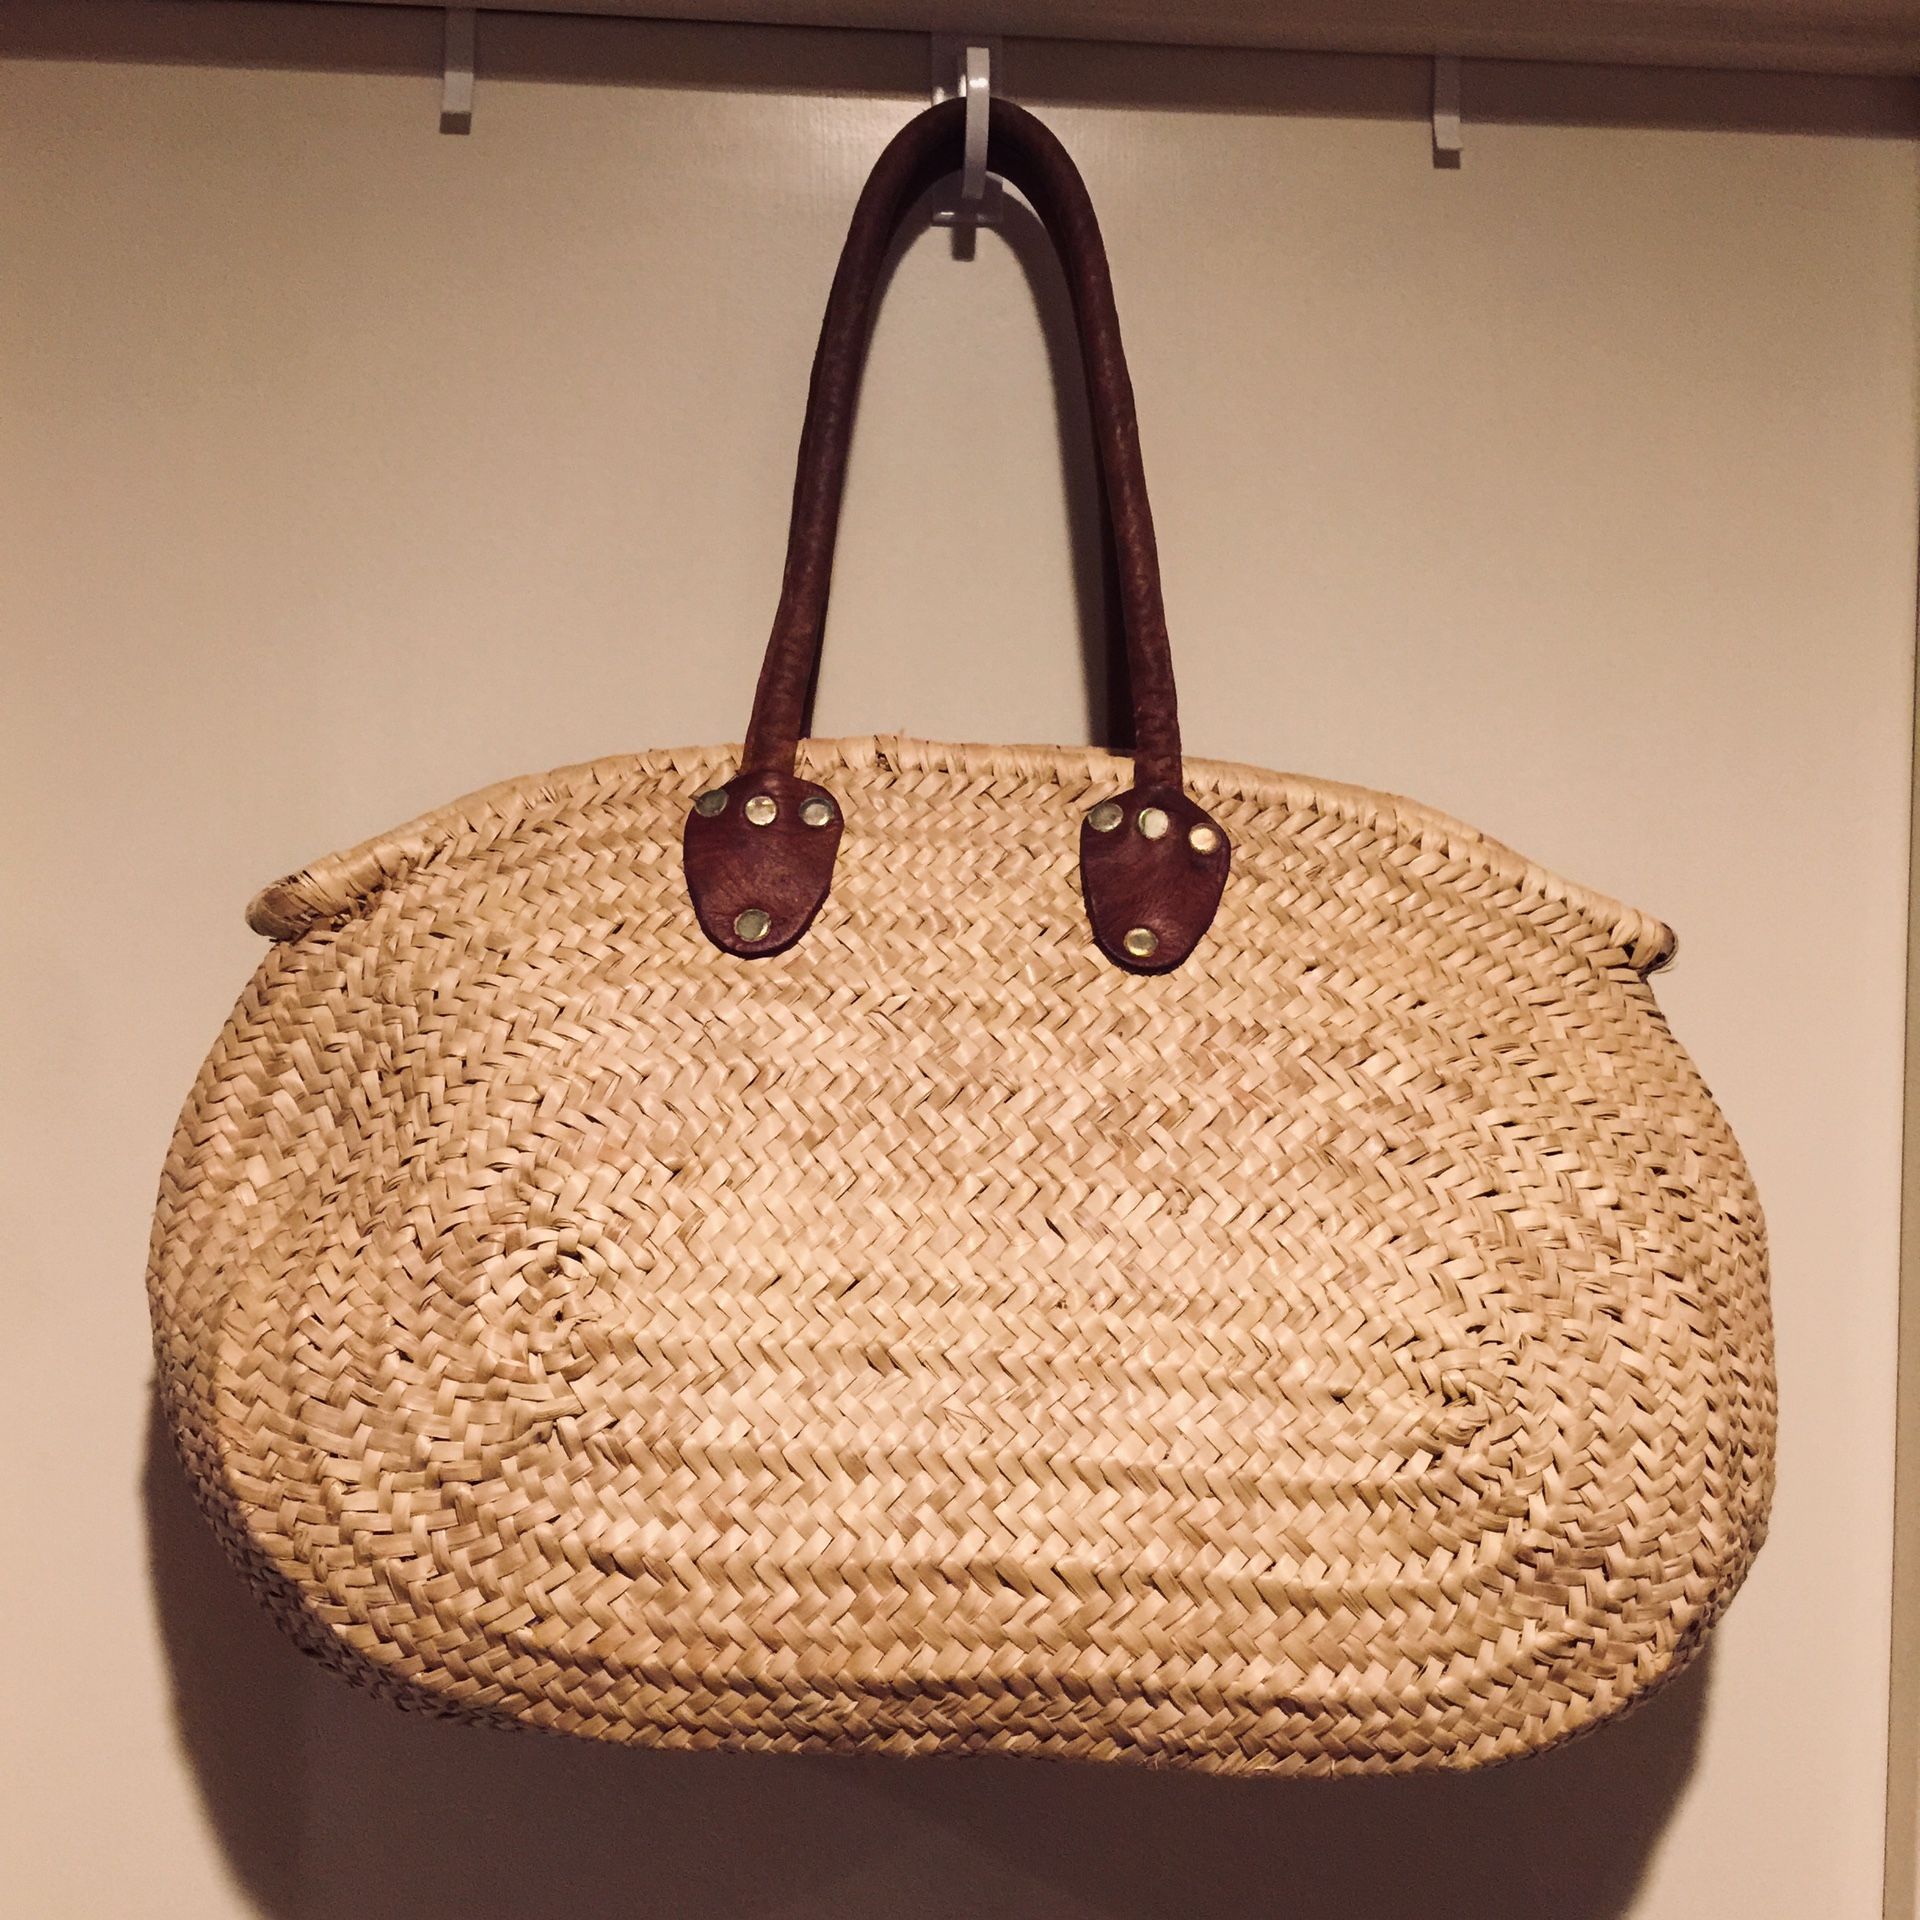 Vintage Woven Wicker/Leather Tote Bag